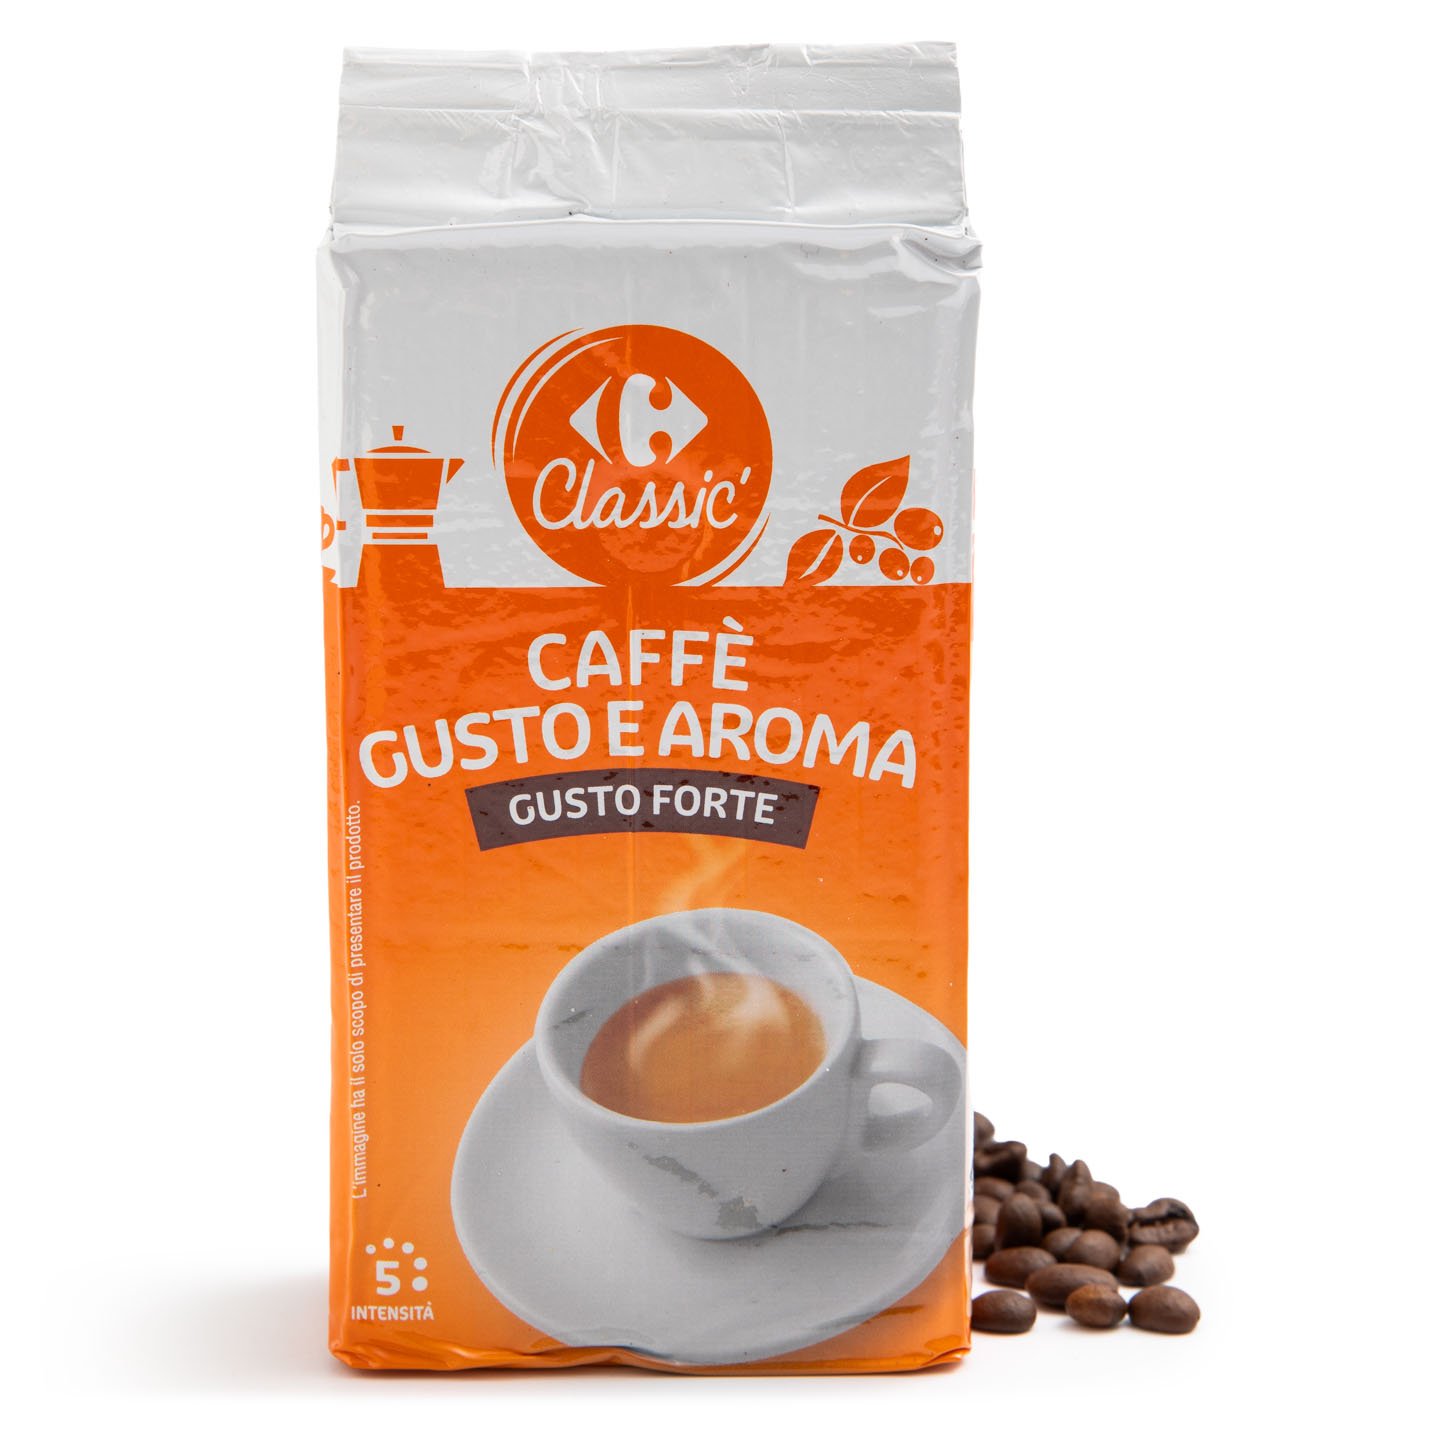 Cafea Gusto Forte Carrefour Classic 250g